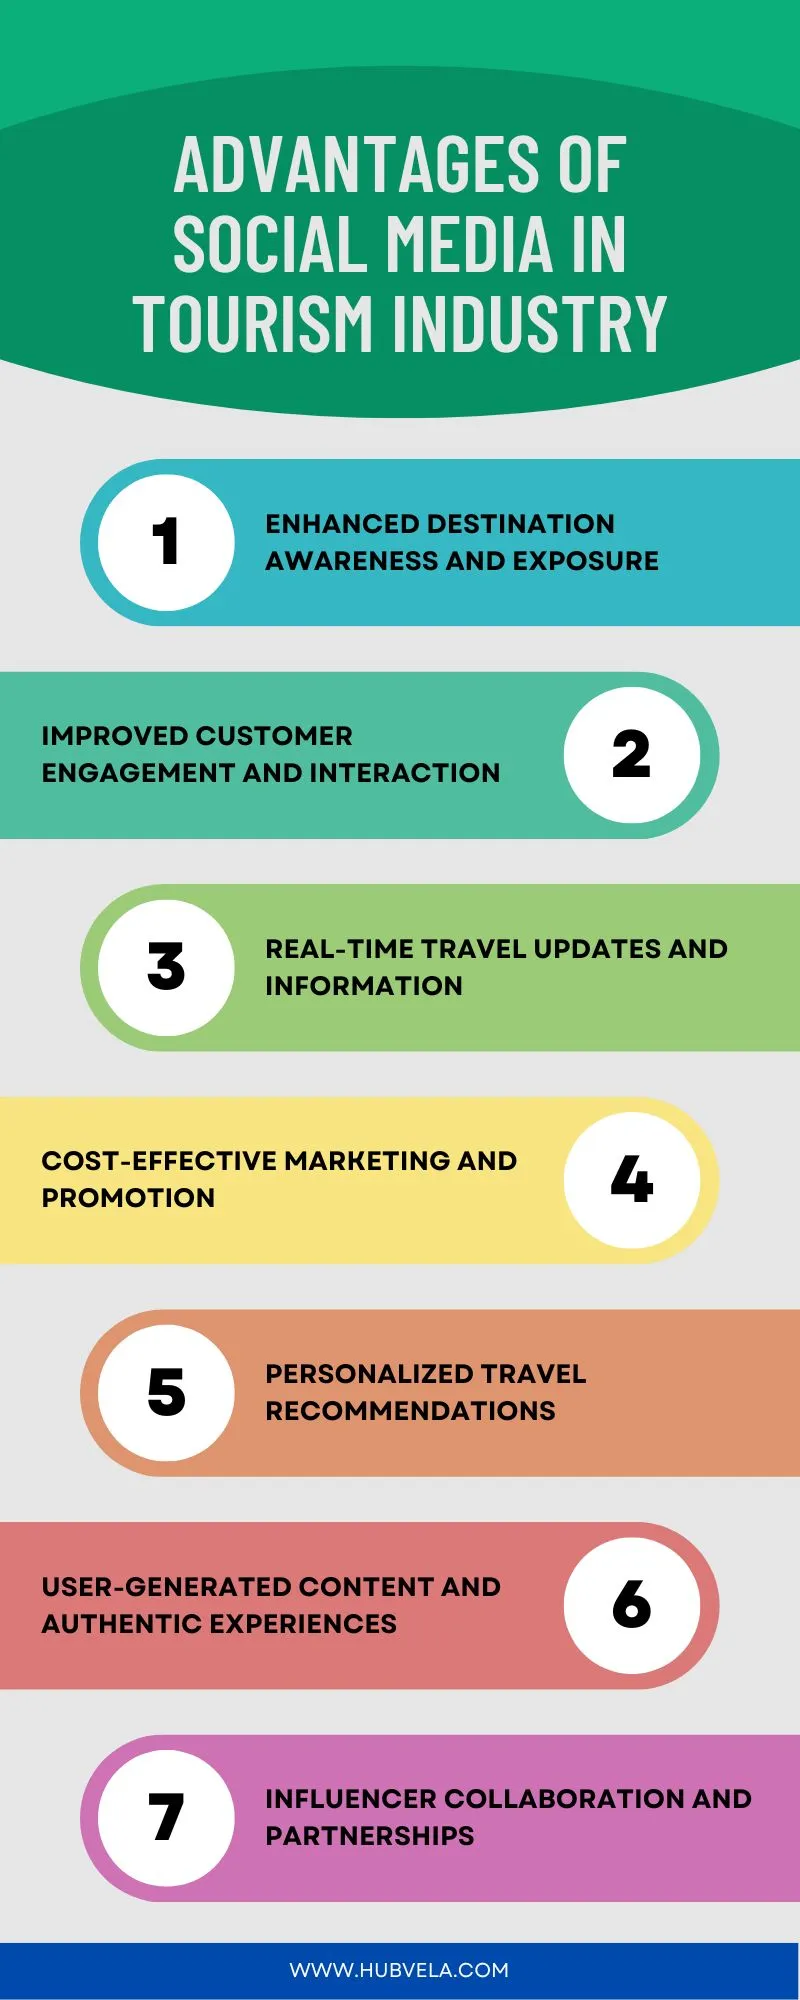 Advantages of Social Media in Tourism industry infographic